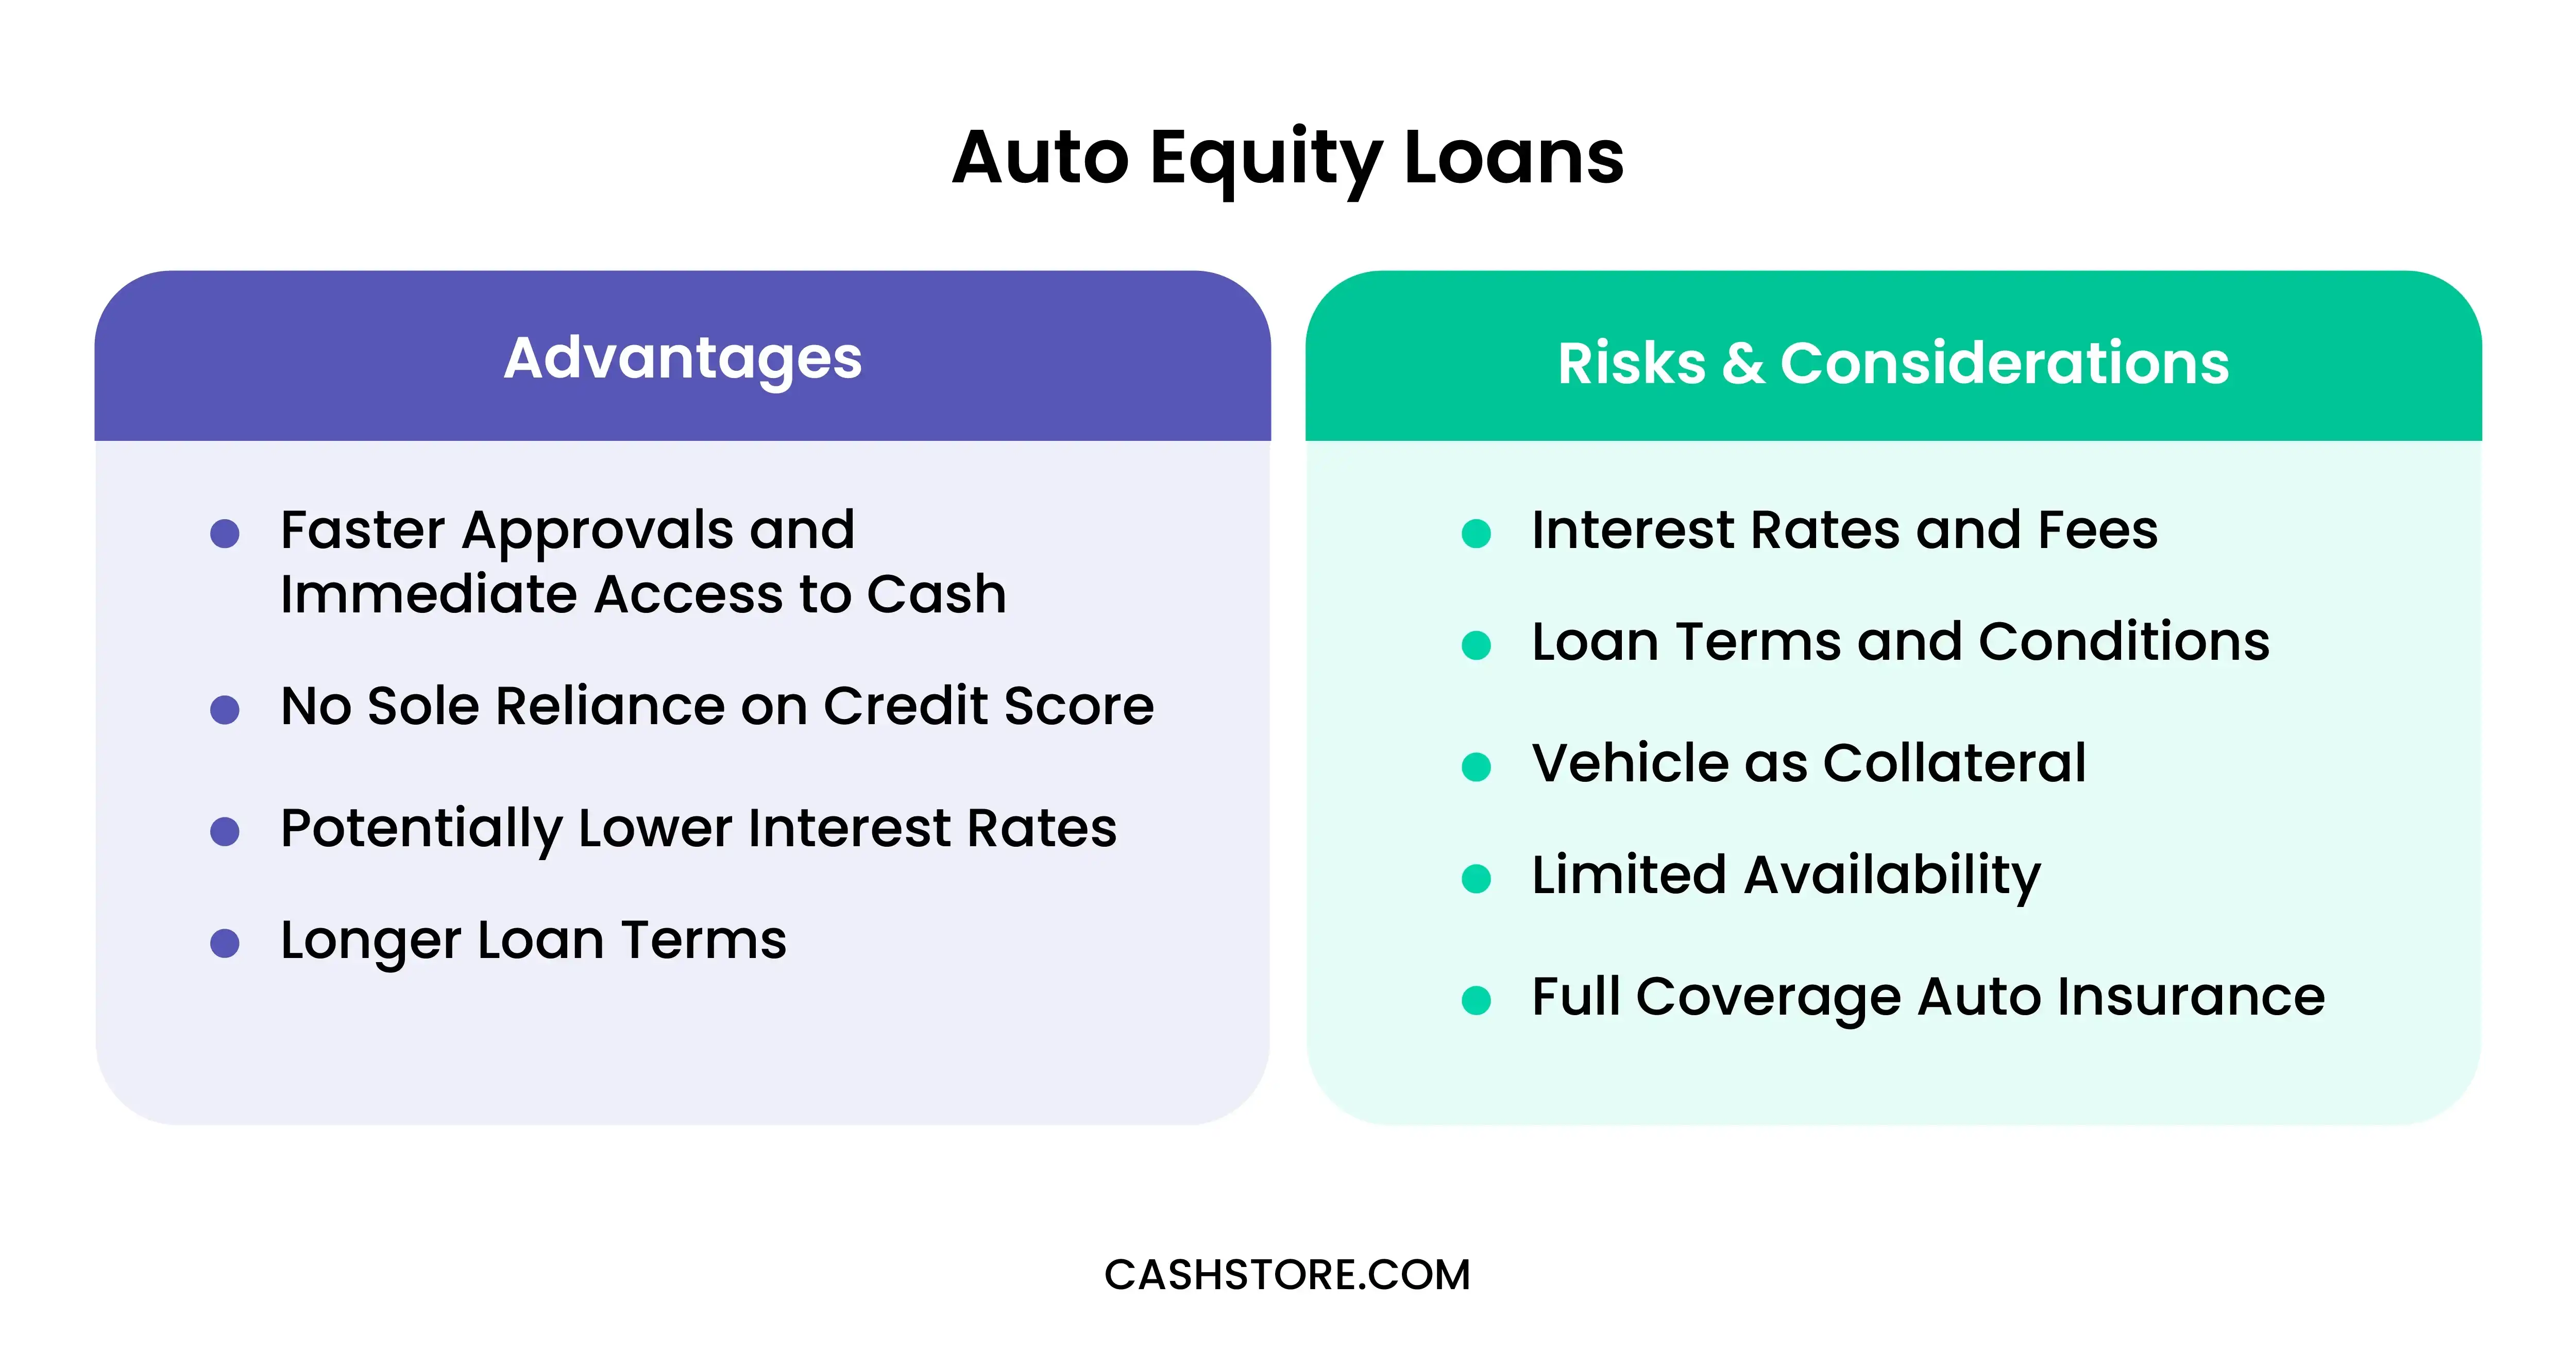 Advantages and Risks/Considerations of Auto Equity Loans